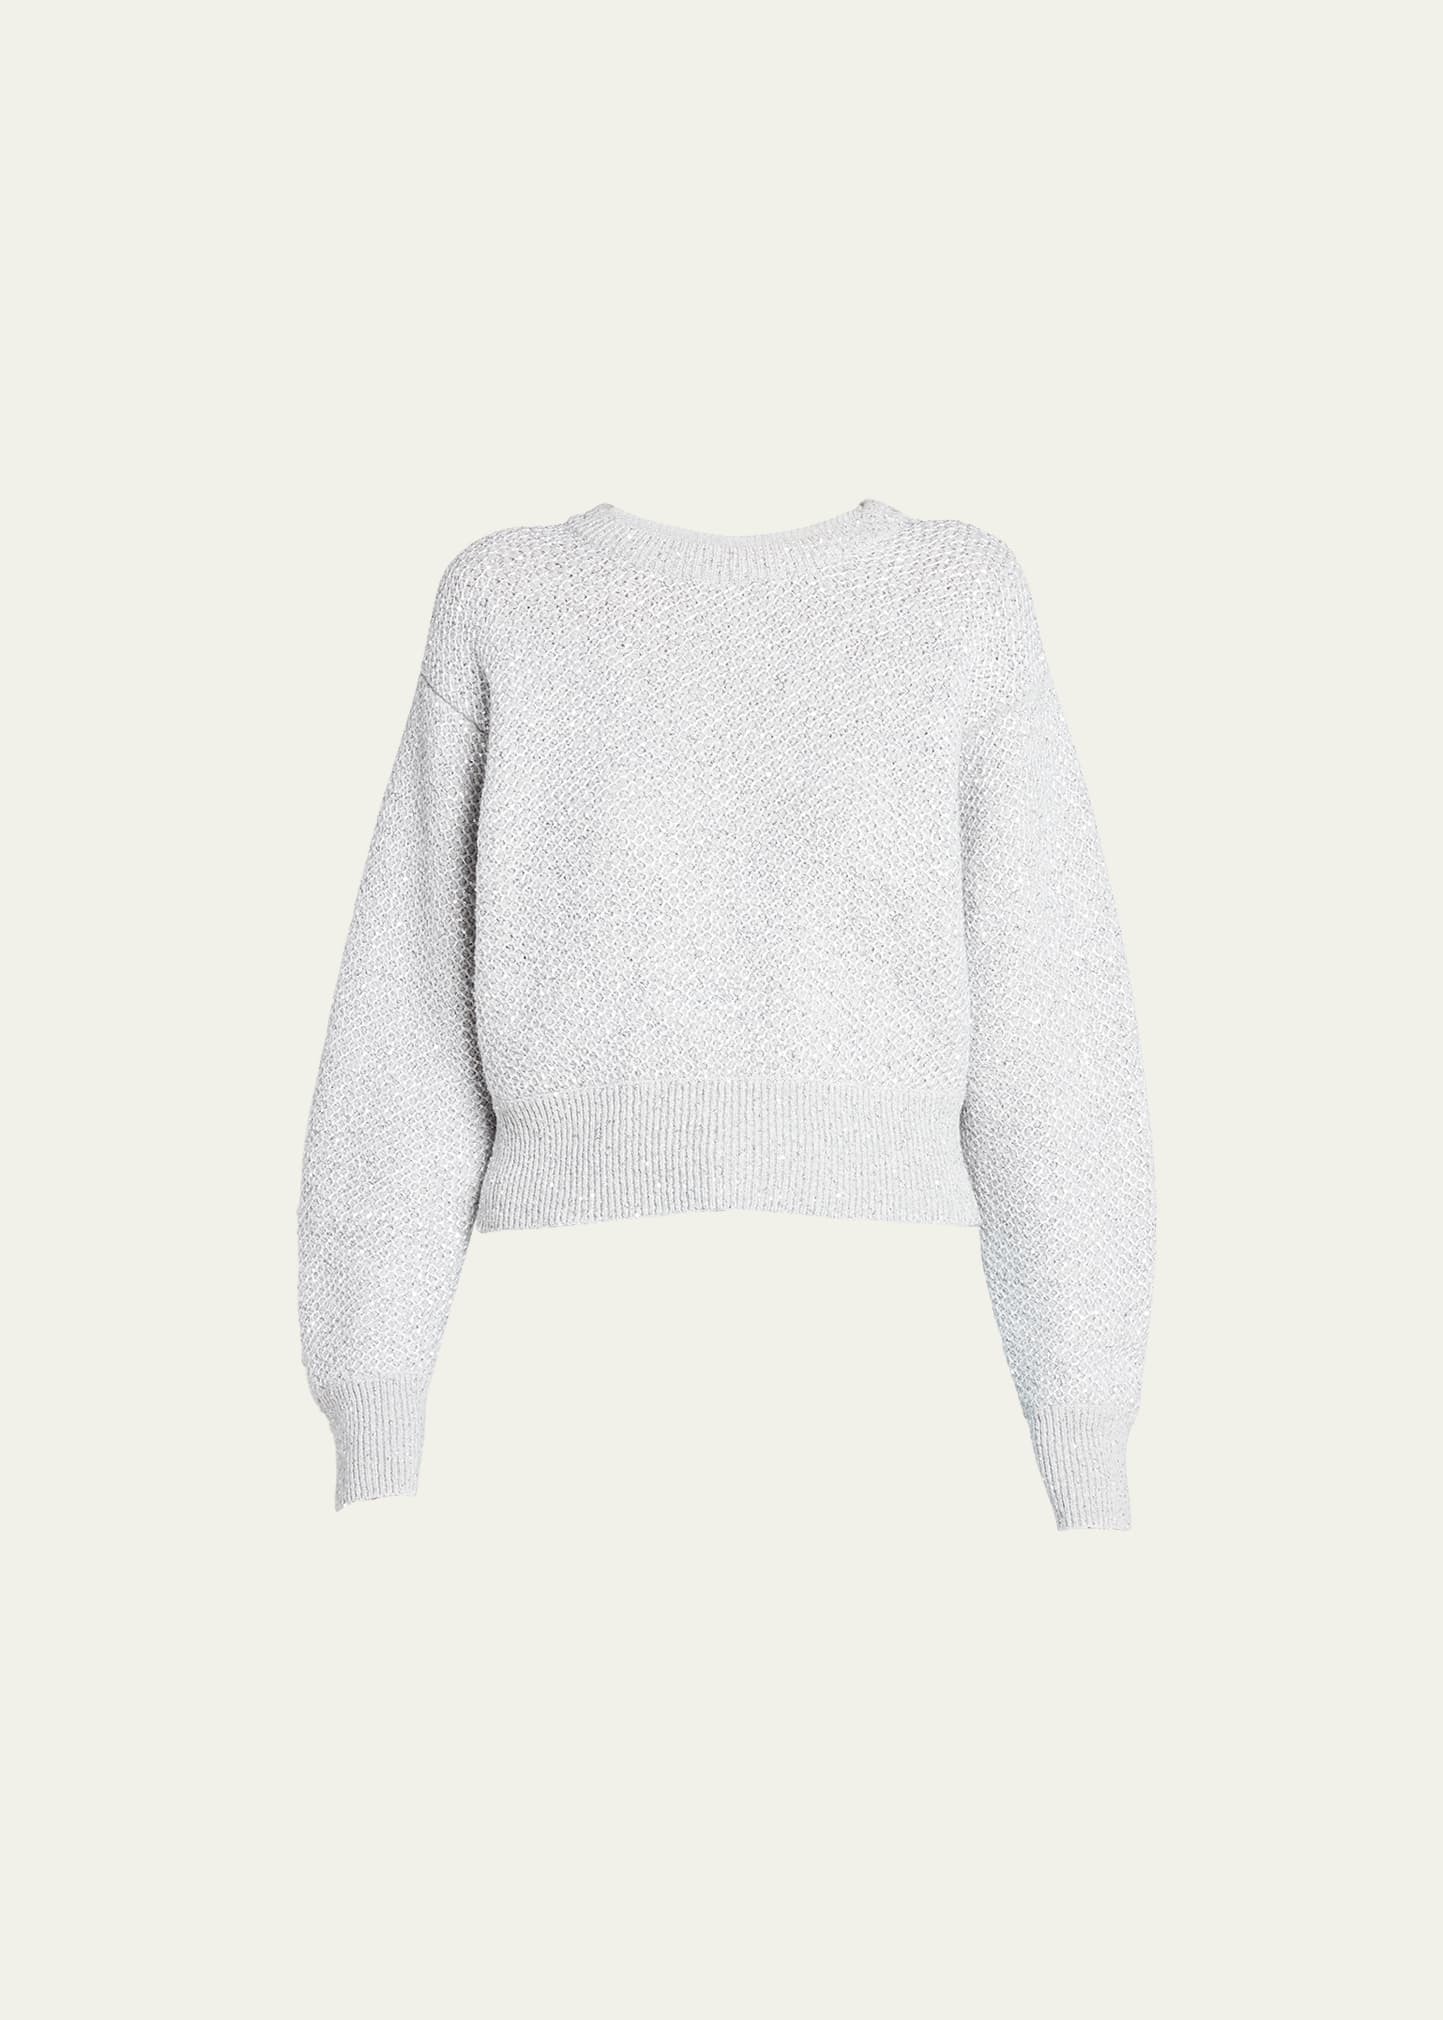 STELLA MCCARTNEY OPEN-BACK KNIT JUMPER WITH SEQUINS